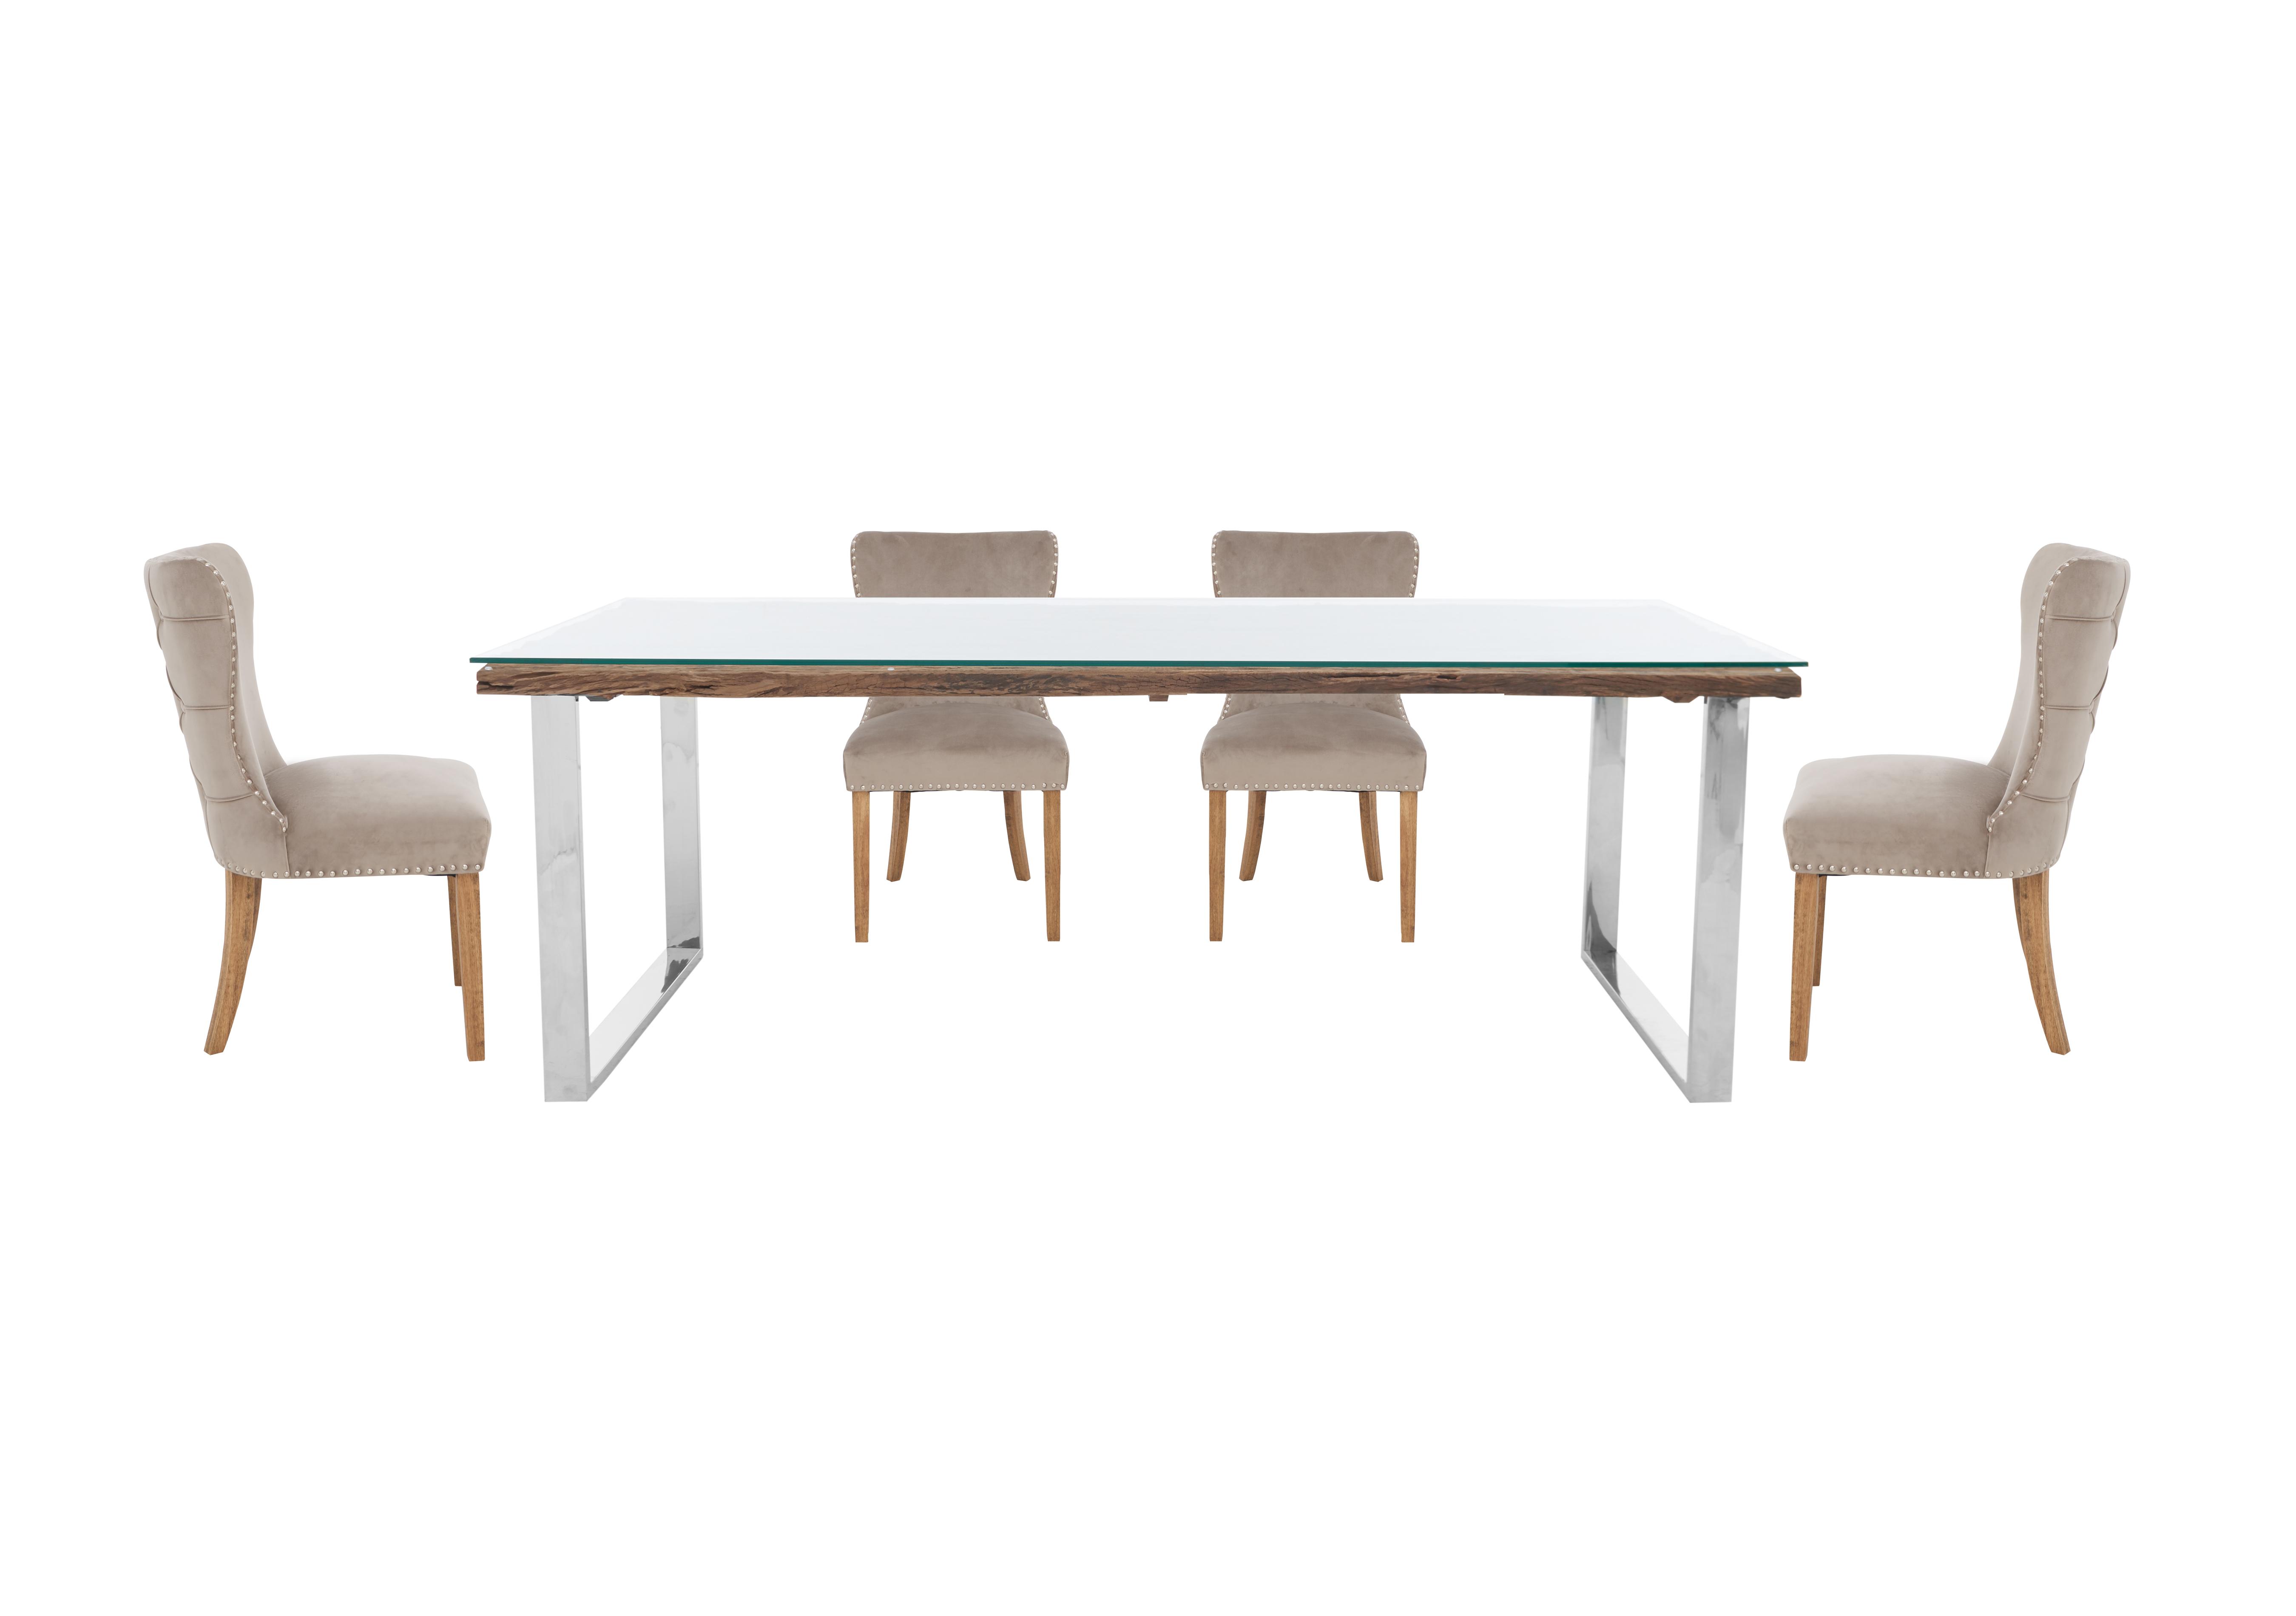 Chennai Dining Table with U-Leg Base and 4 Luxe Dining Chairs in Taupe on Furniture Village